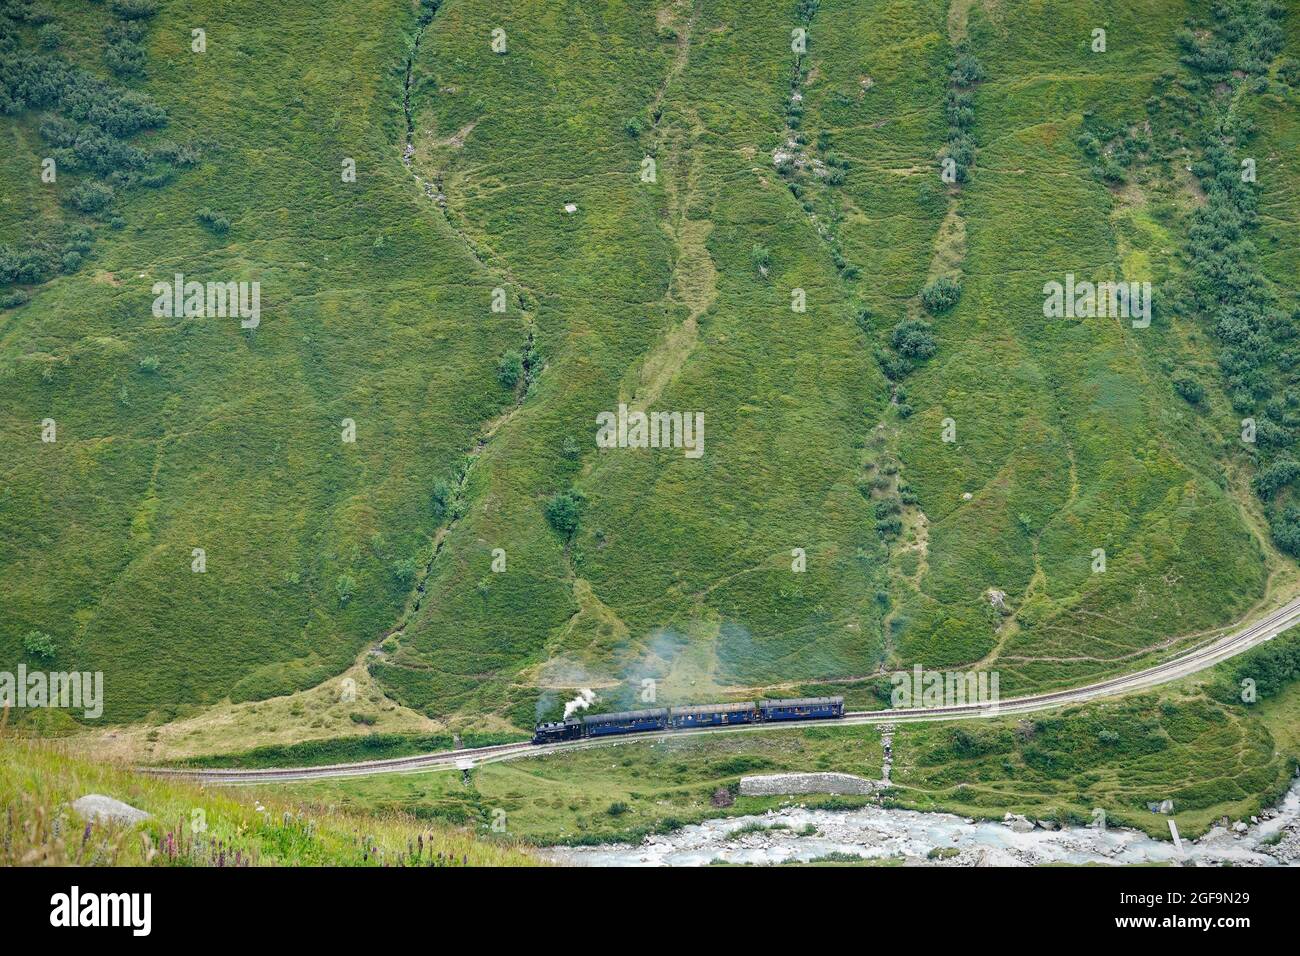 Furka steam train through the mountain landscapes of the Central Alps on the historic Glacier Express route. Furkapass, Switzerland - August 2021 Stock Photo